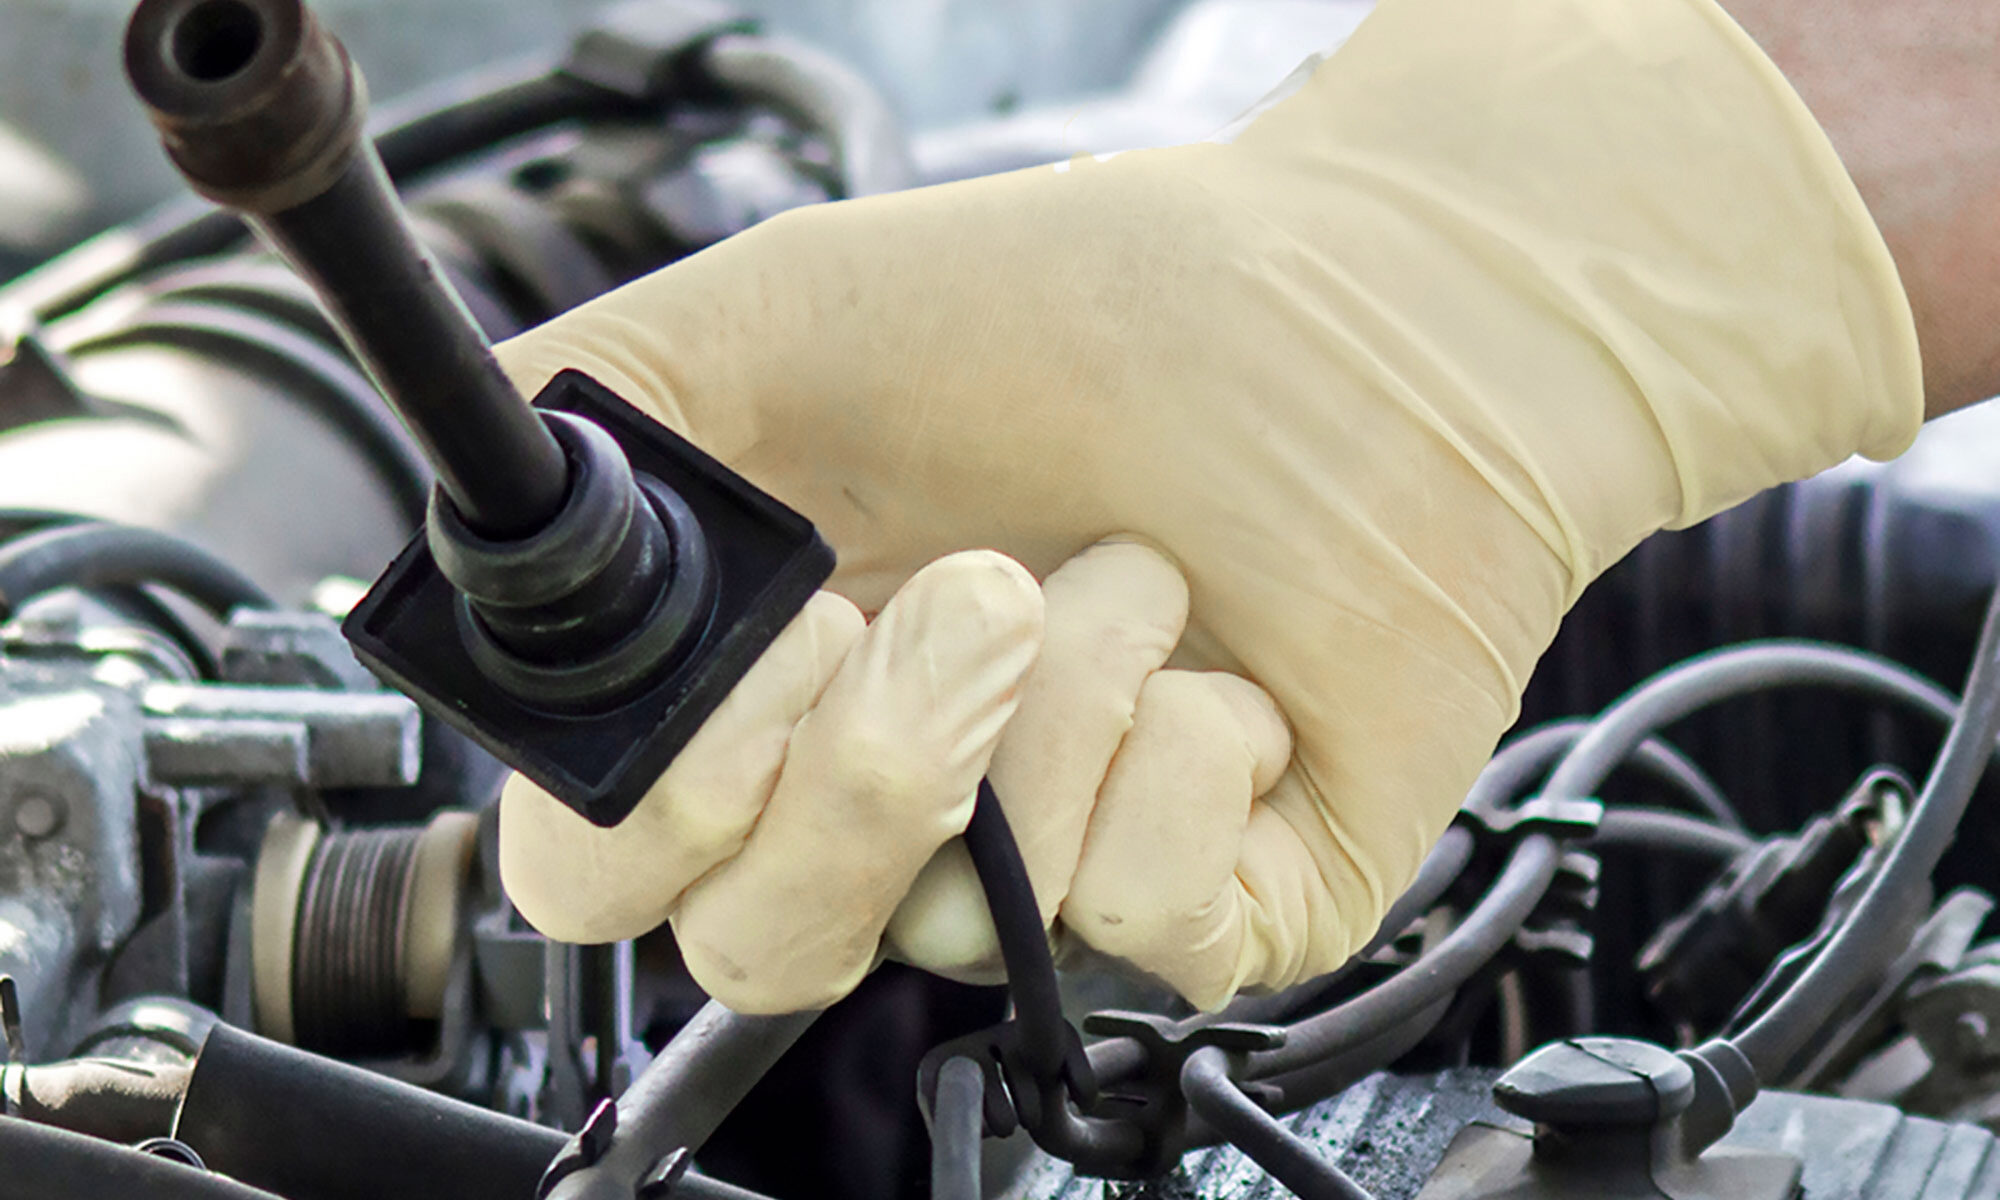 A user works on an engine while wearing Gloveworks heavy-duty latex gloves (ILHD).